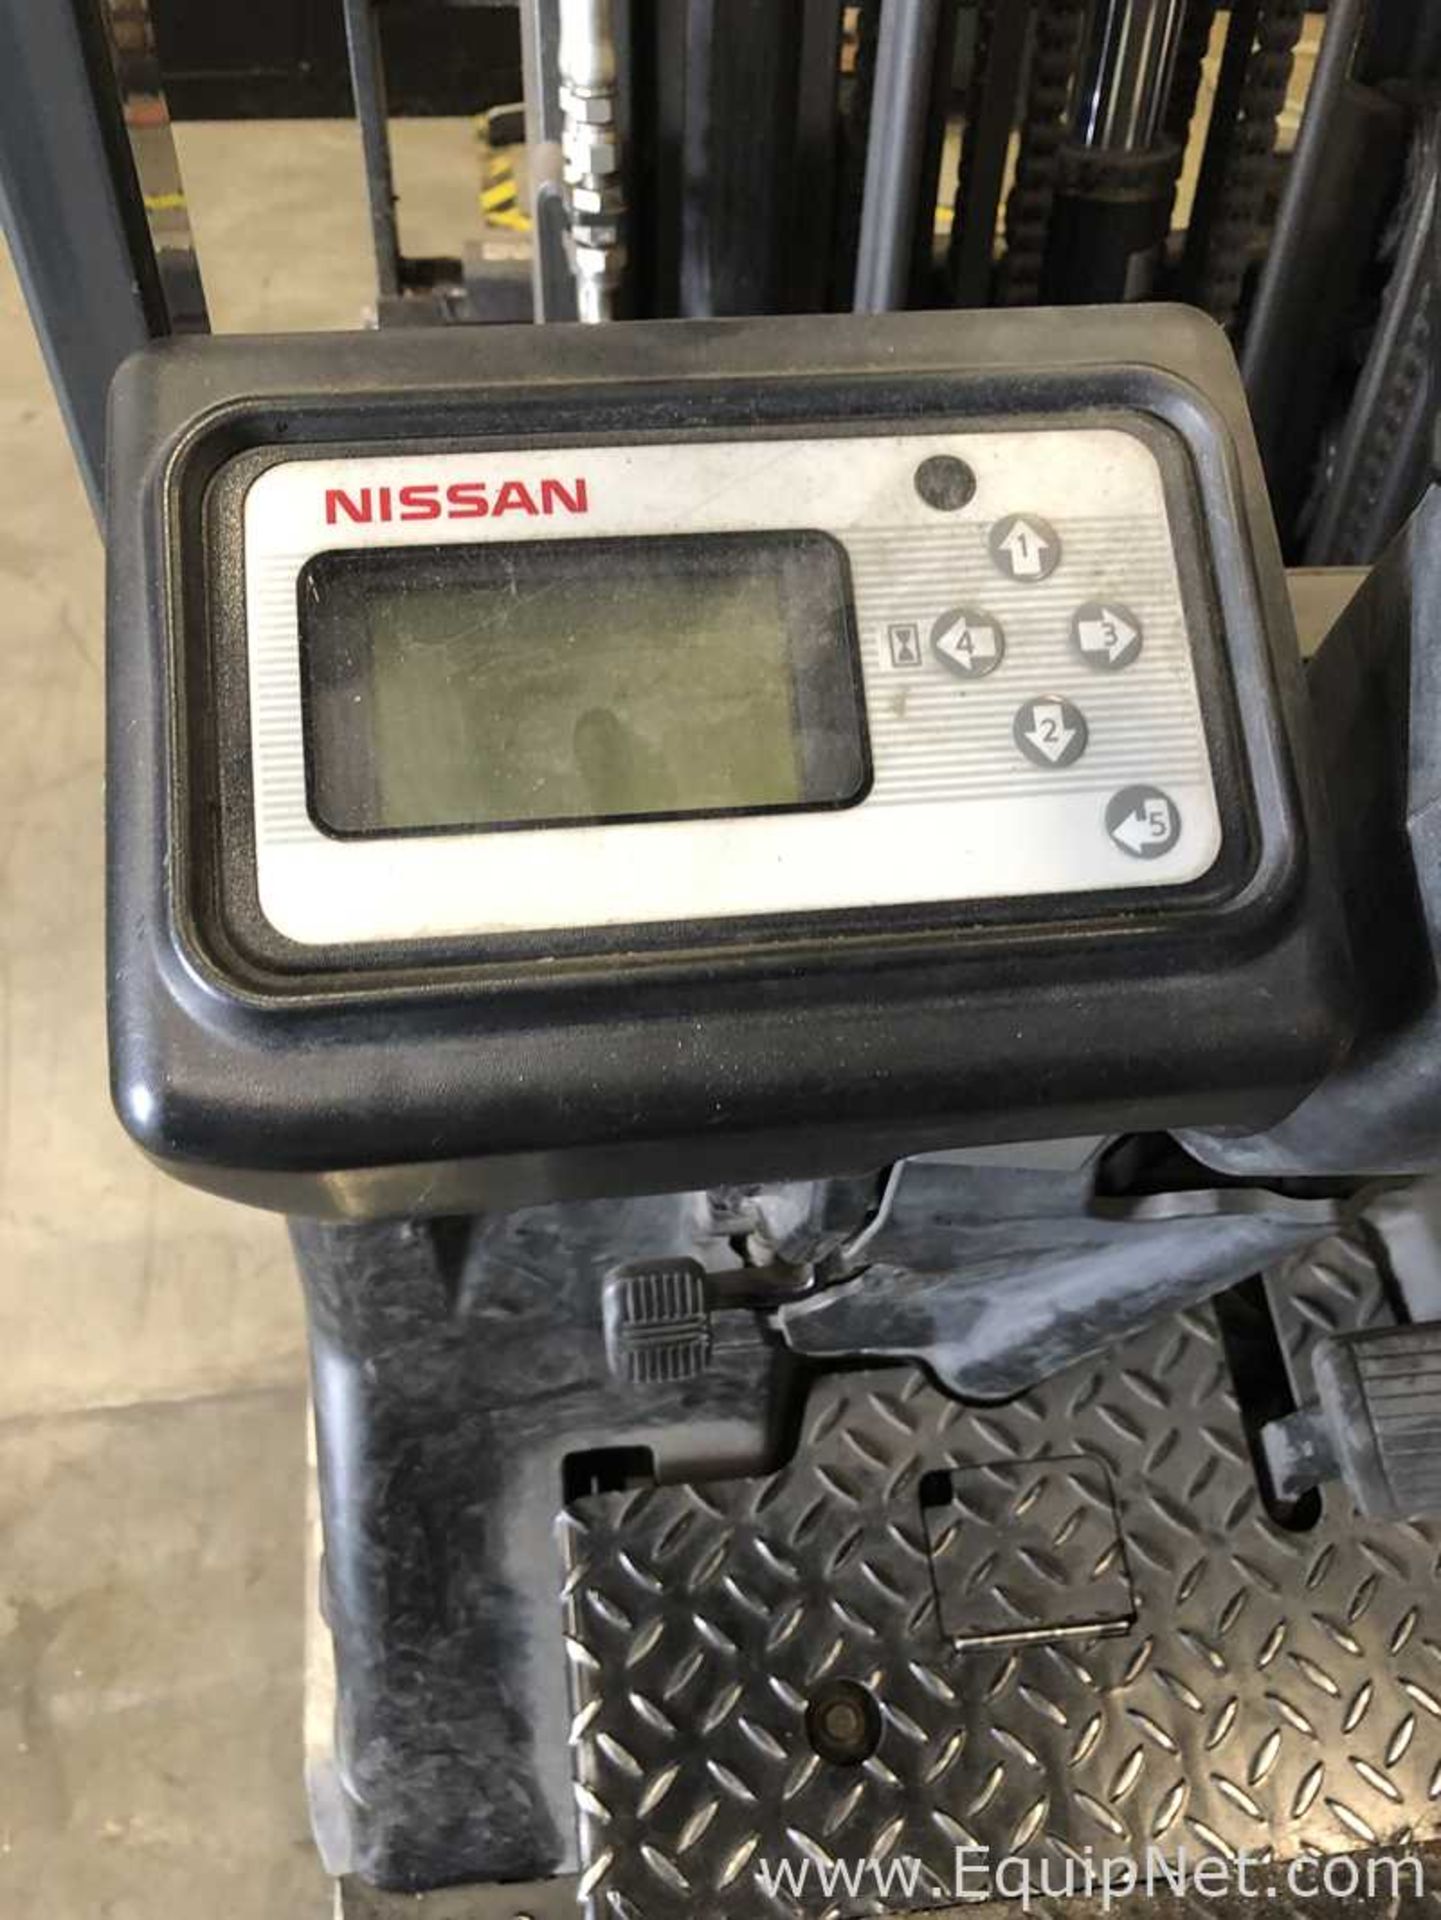 Nissan CK1B1L18S Electric 3500 Pound Fork Lift - Image 4 of 12